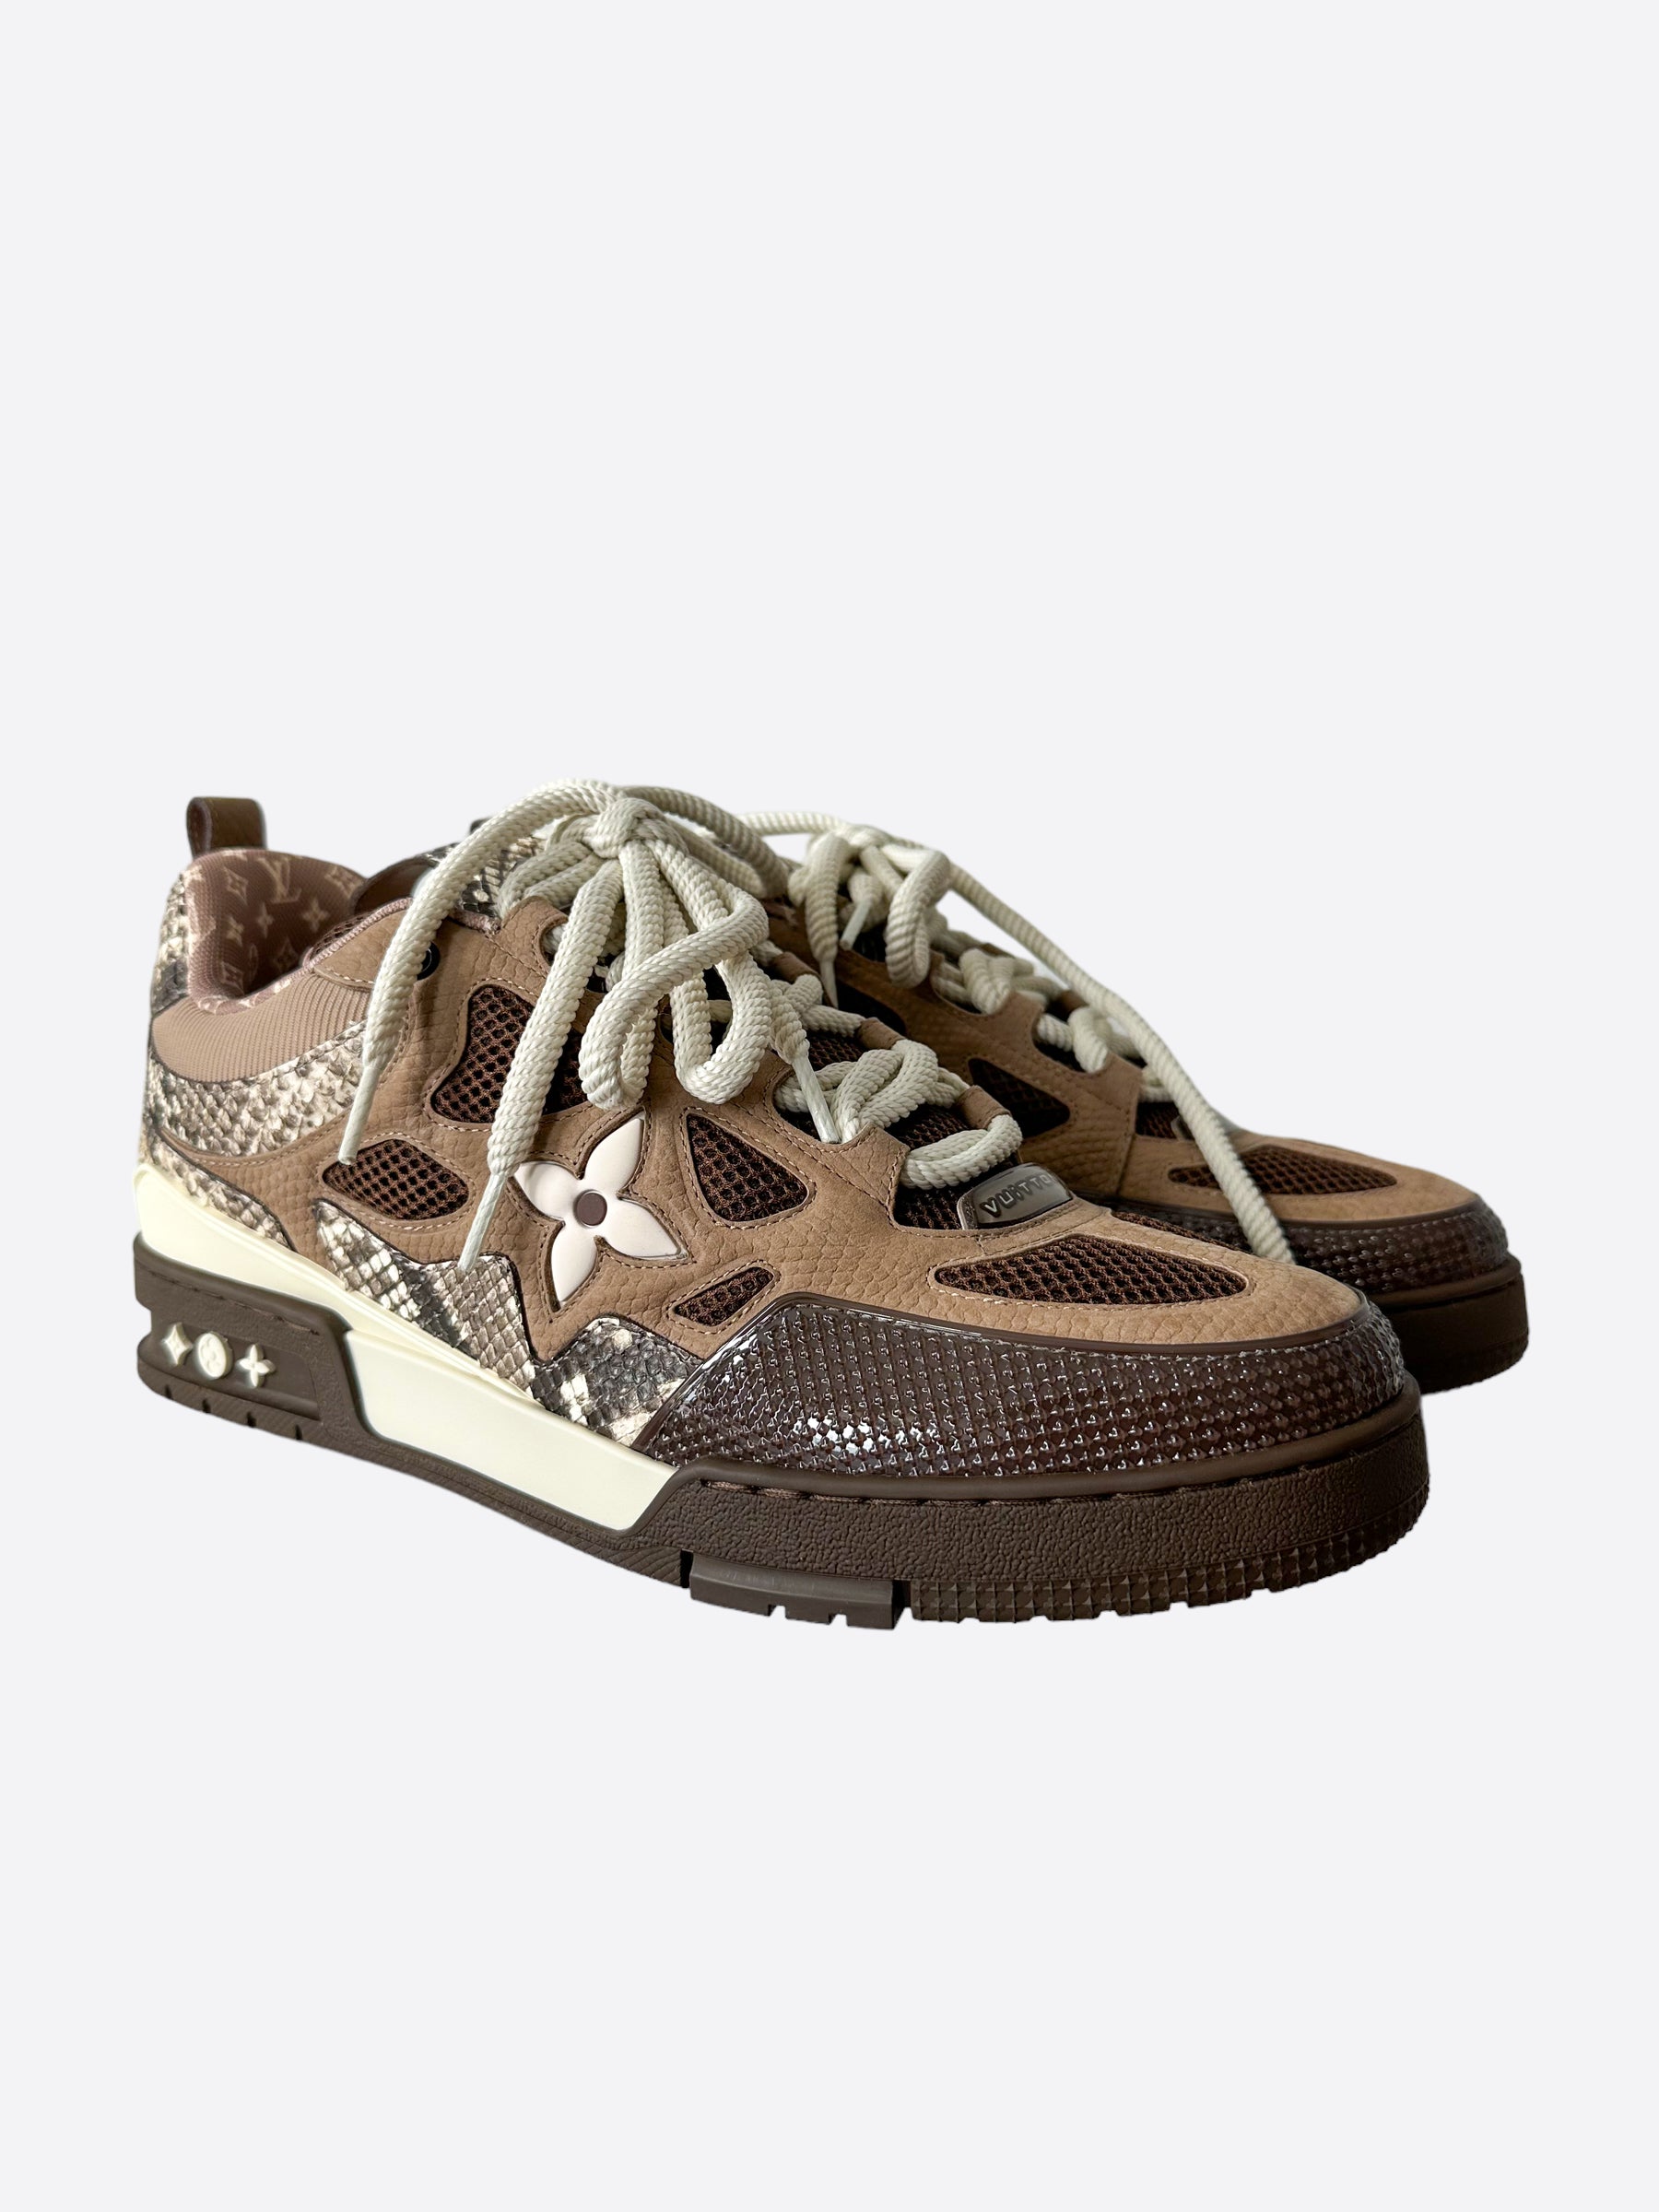 Louis Vuitton Trainer Brown – THE SHOE SOCIETY